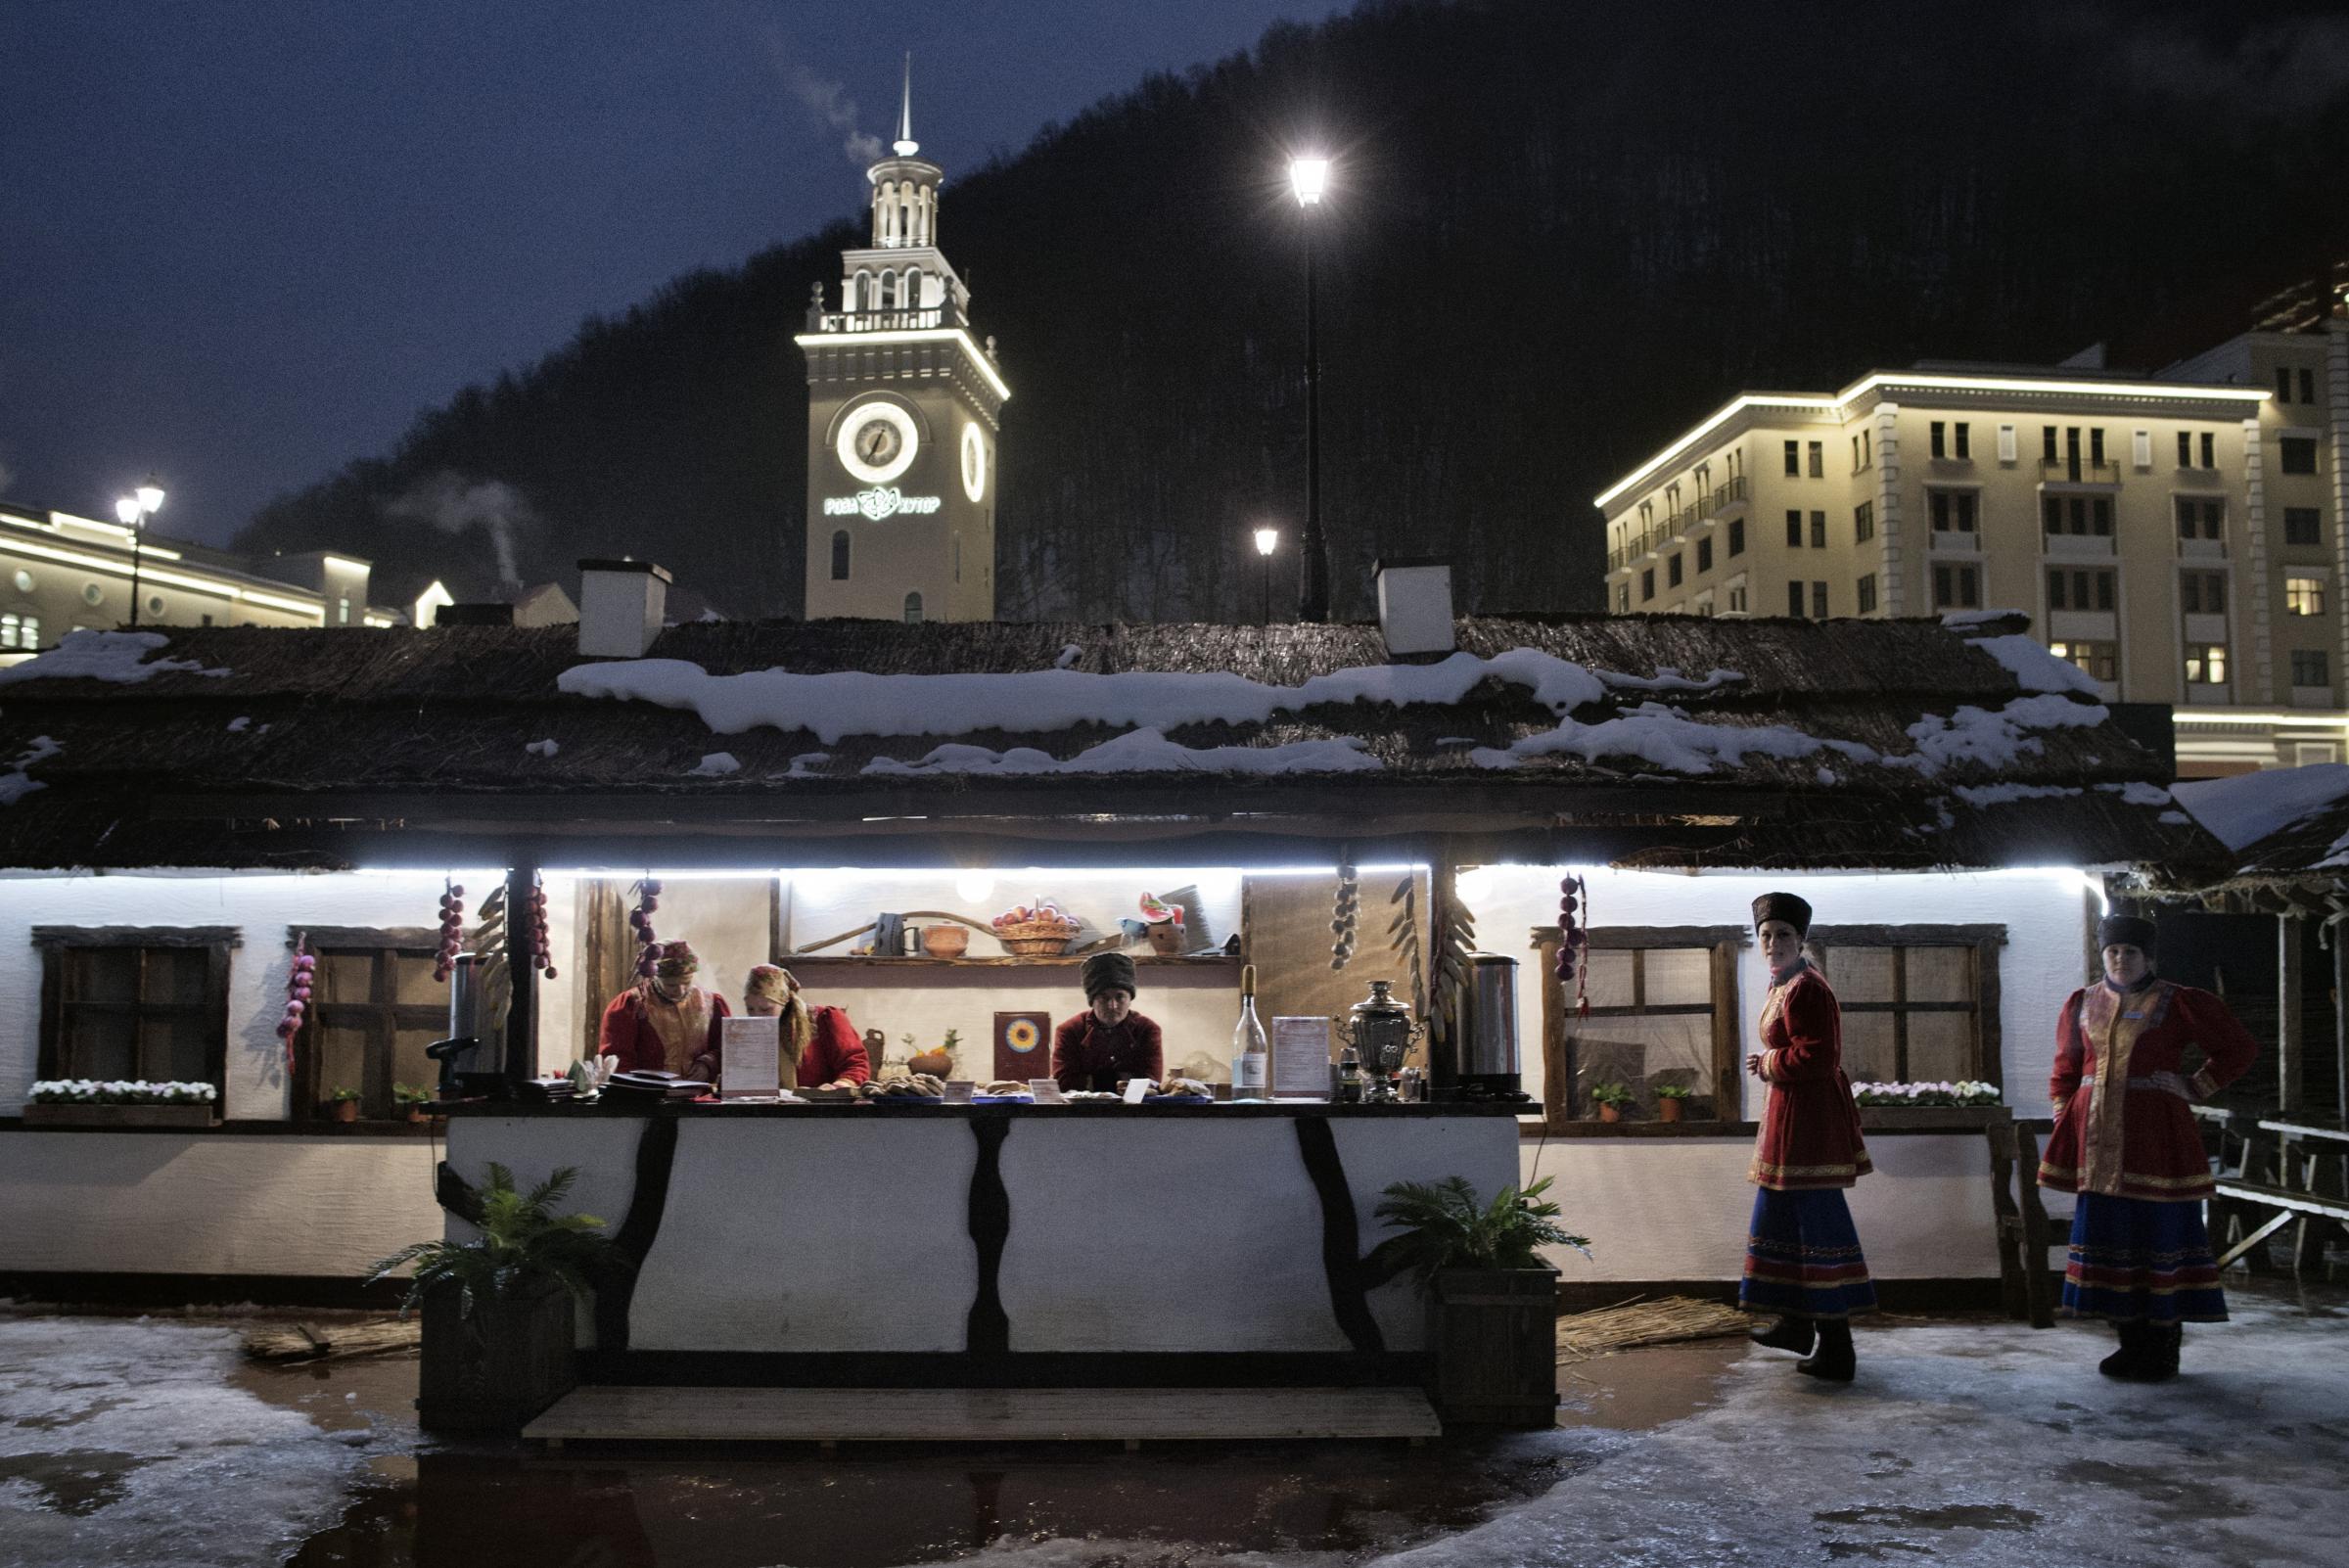 Sochi Russia January  17 2014 Workers wait for clients at the borsht bar erected in the center of Roza Khutor, the skiing village that will serve as a key venue for the Winter Olympic Games in Sochi. Dressed in traditional Cossack uniforms and serving up carafes of stiff Russian moonshine, the eatery injects a touch of local culture Ðand kitsch Ð into the otherwise staid and sleek atmosphere of Roza Khutor.